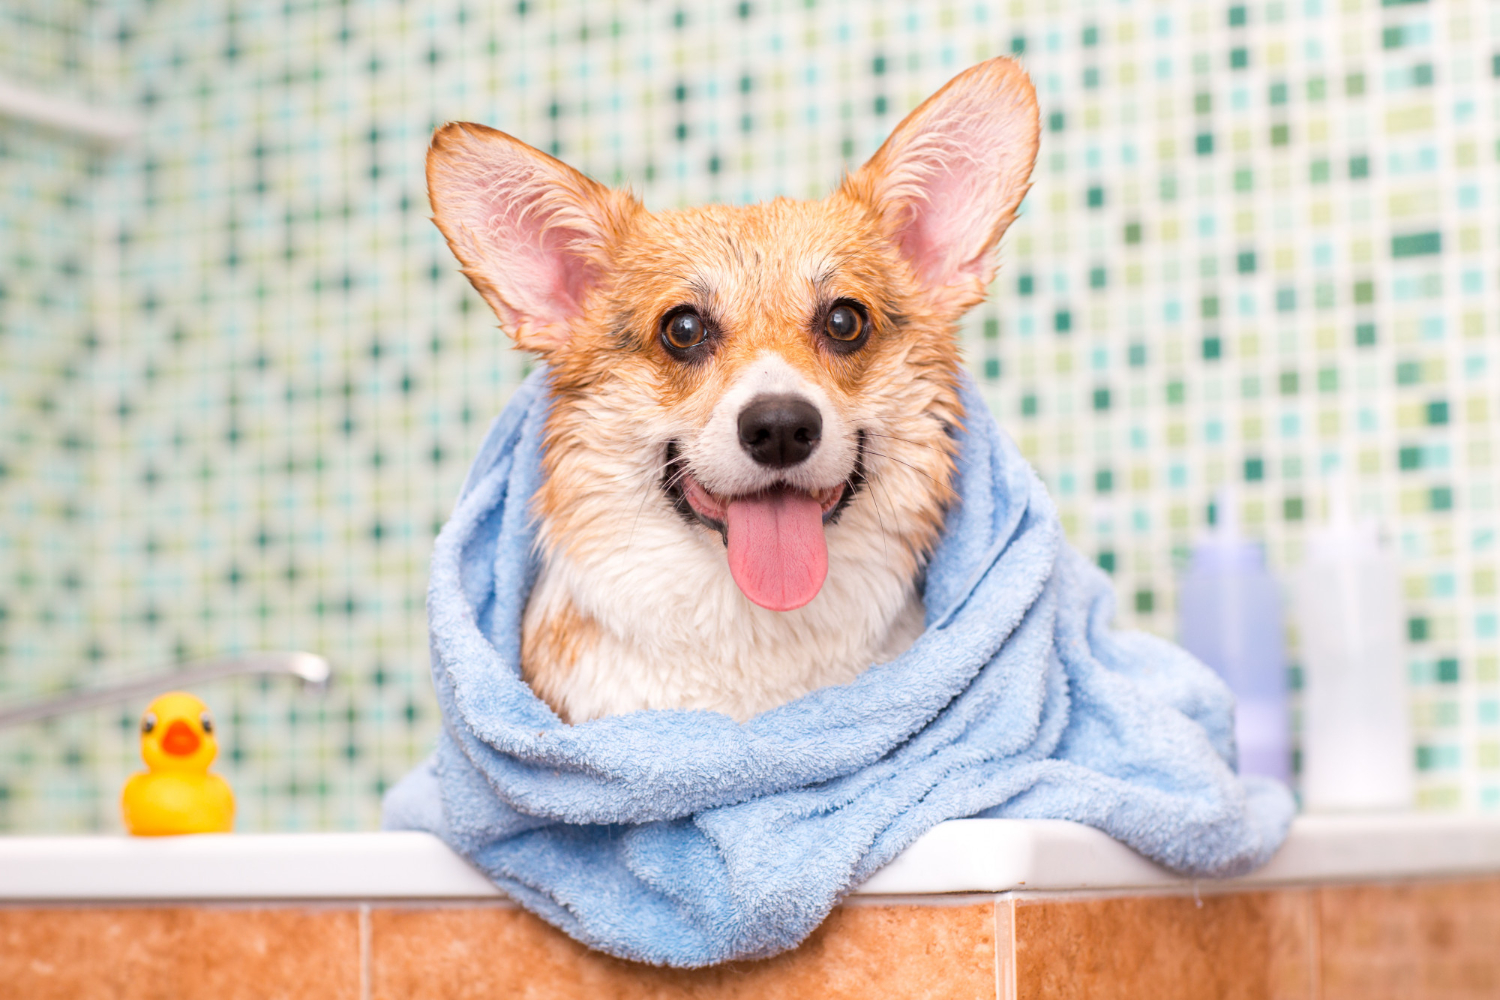 Dog Bathing 101: Tips and Tricks for Stress-Free Bath Time